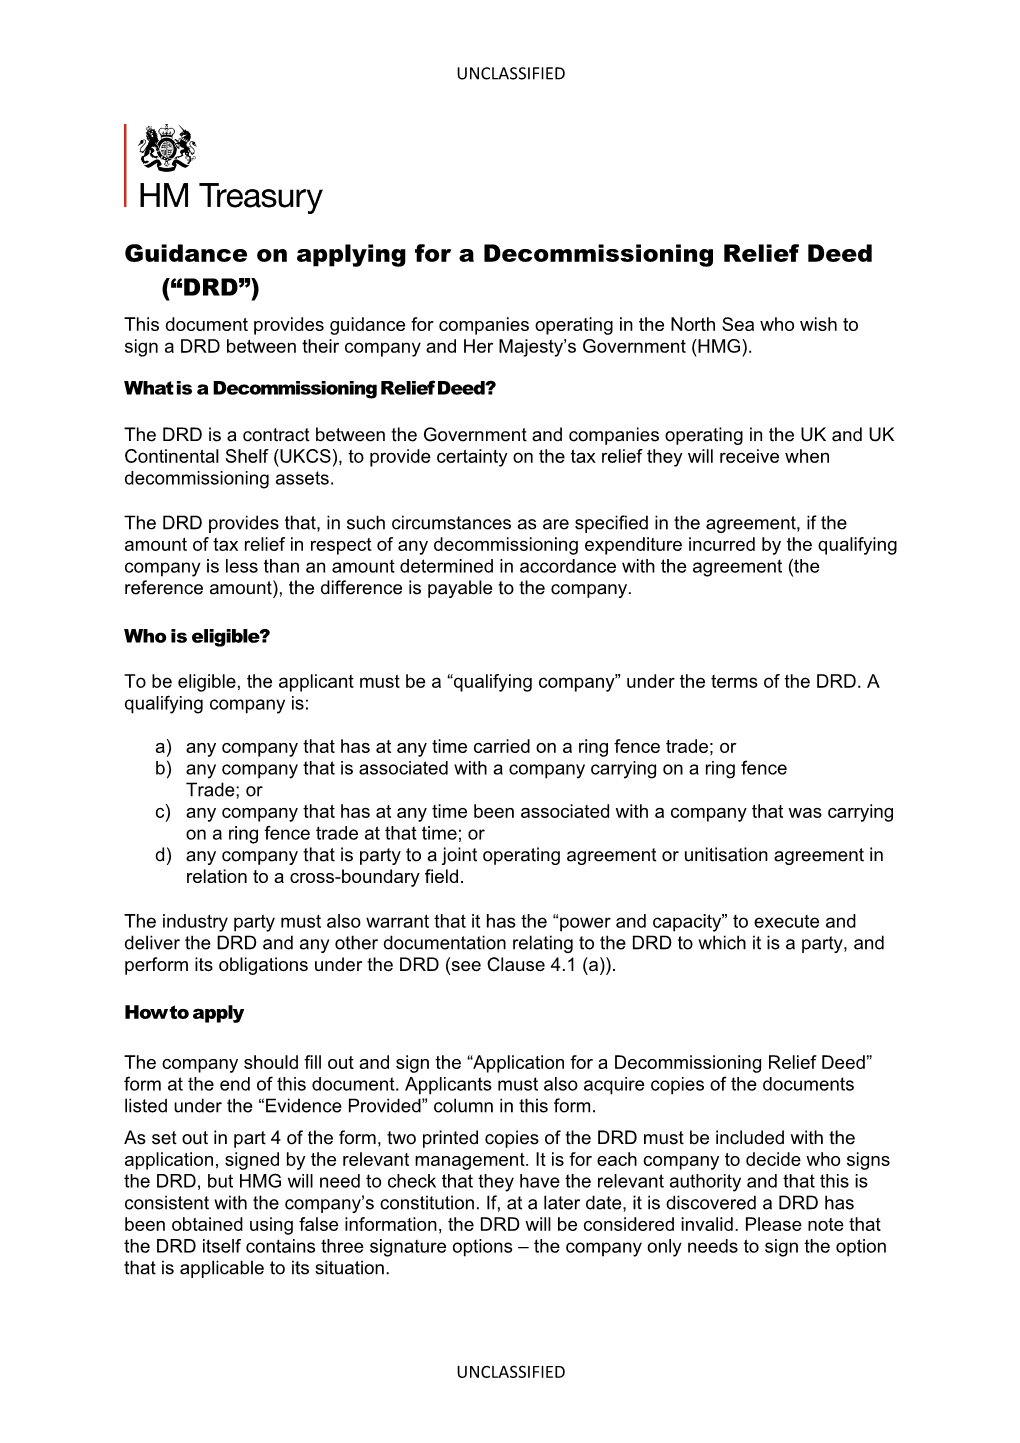 Guidance on Applying for a Decommissioning Relief Deed ( DRD )